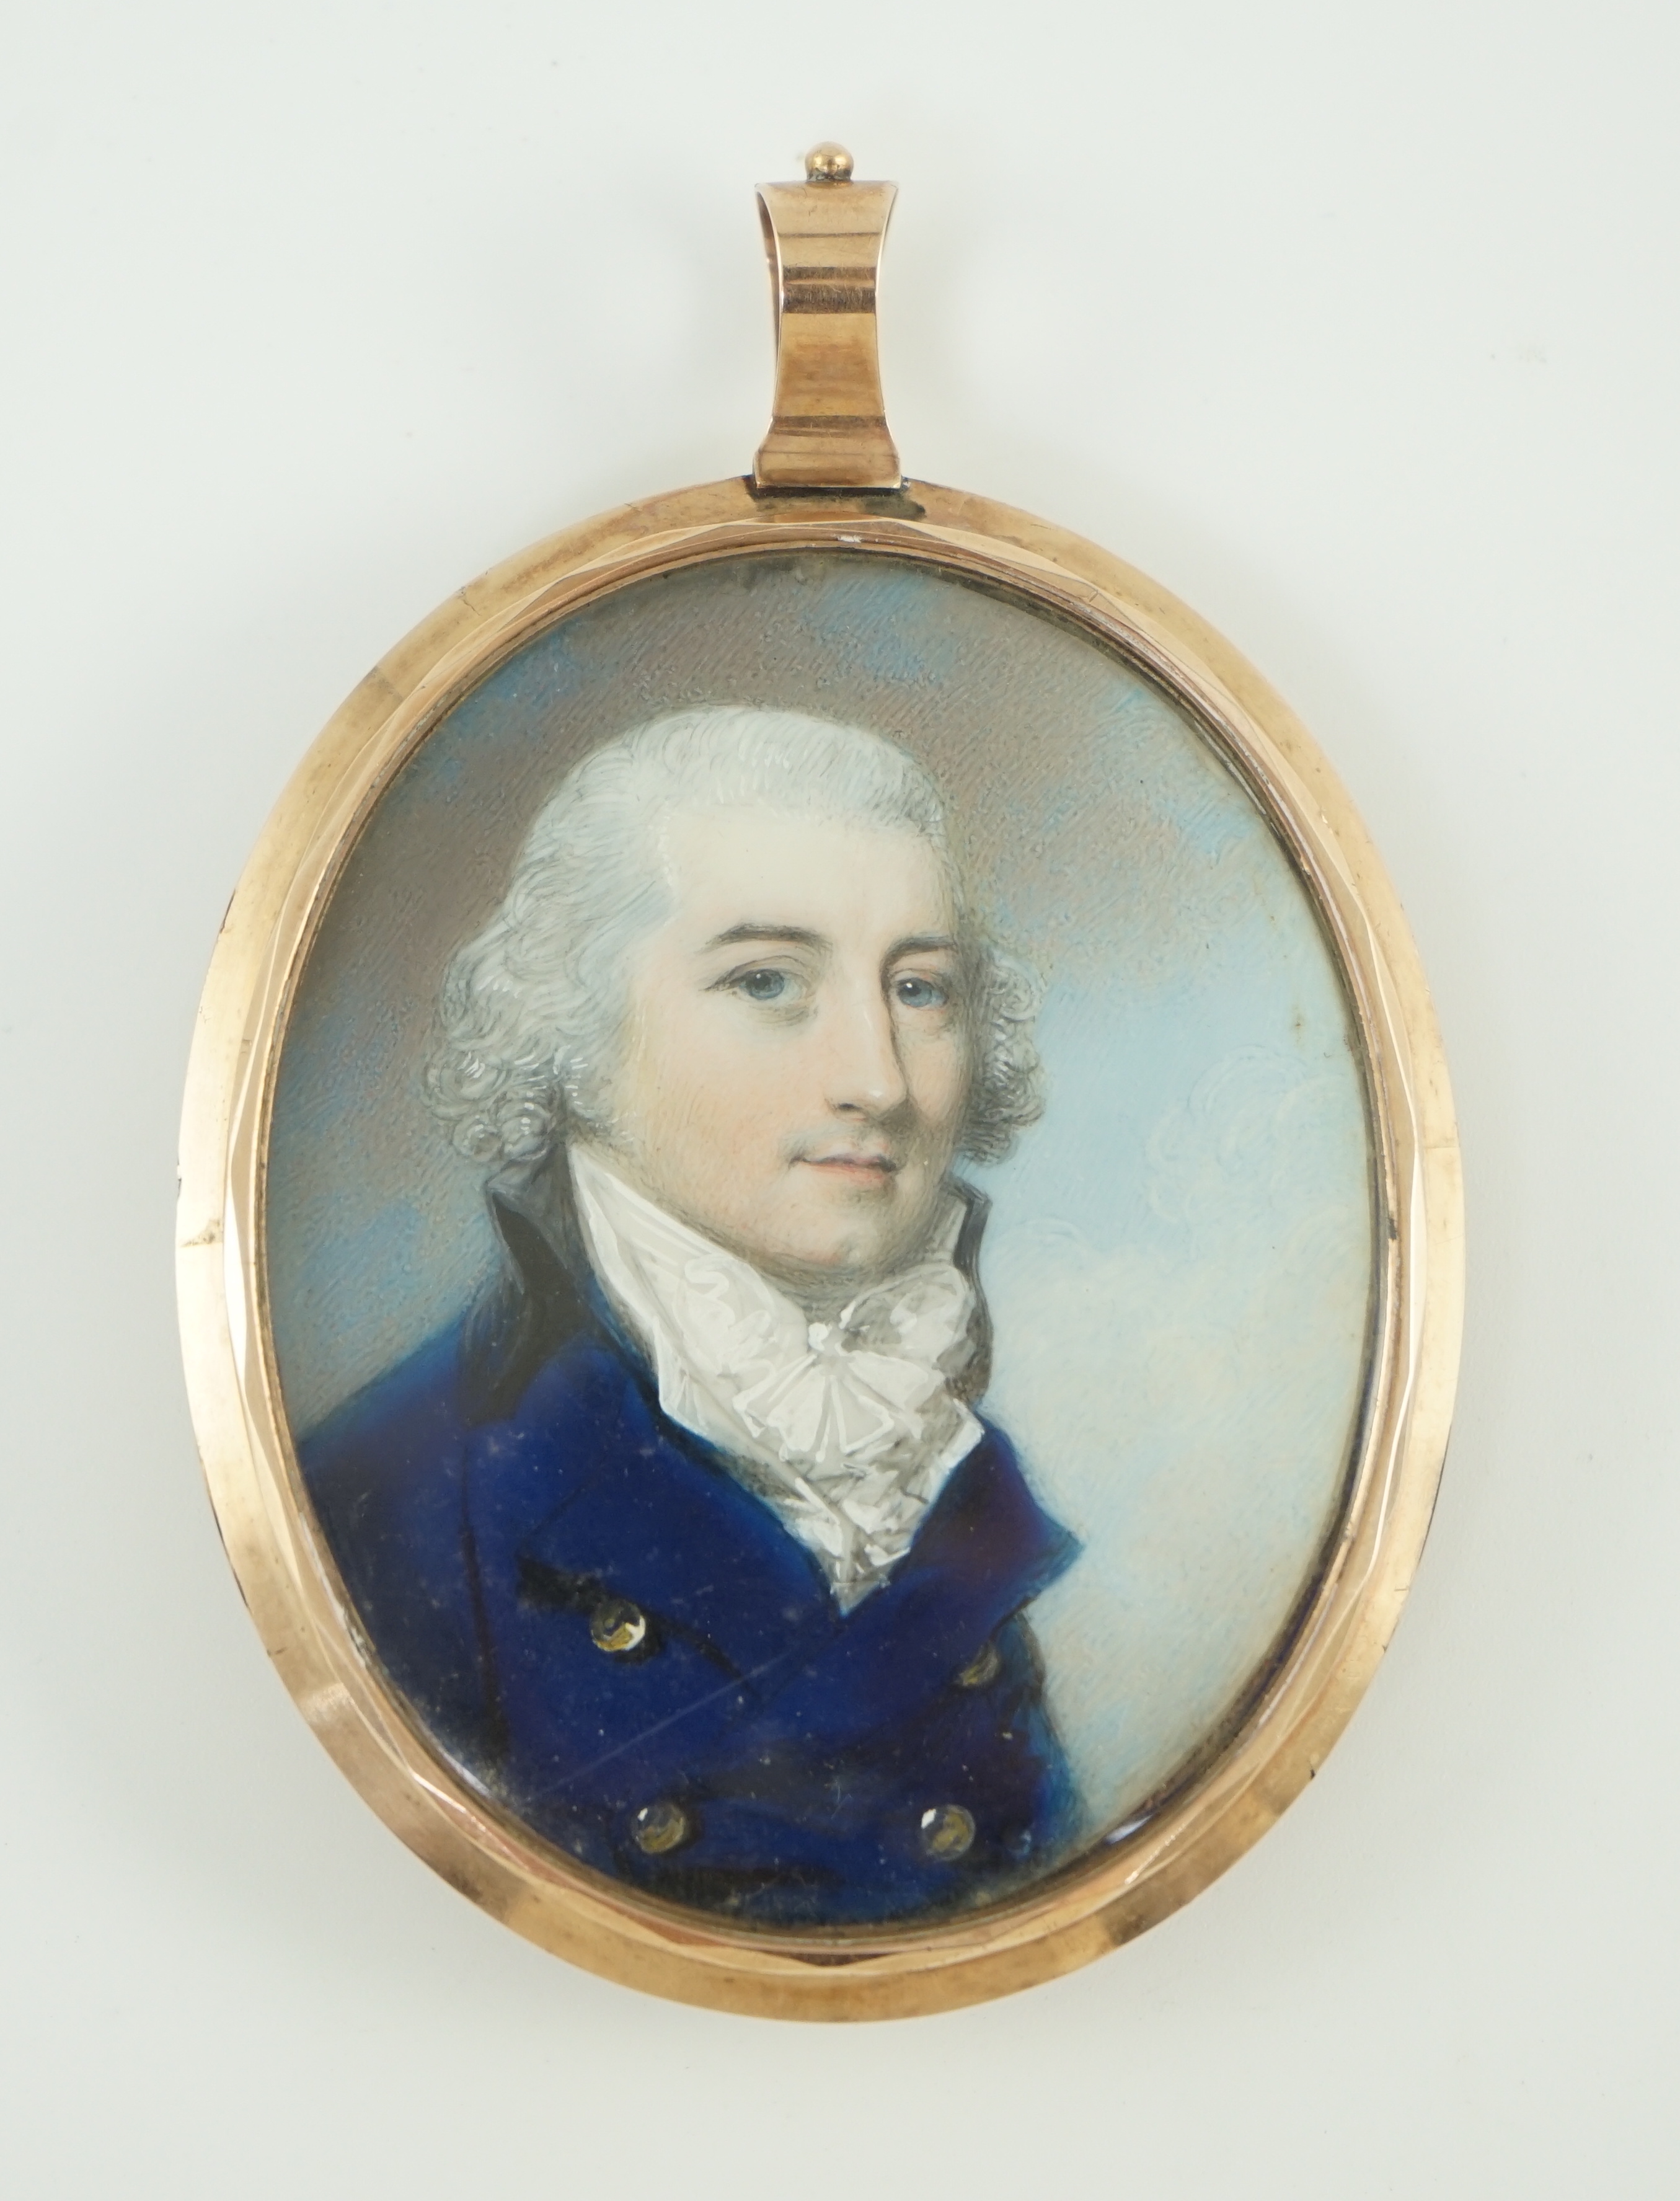 Attributed to George Engleheart (1750-1829), Portrait miniature of a gentleman, watercolour on ivory, 6 x 5cm. CITES Submission reference UHX15PXN